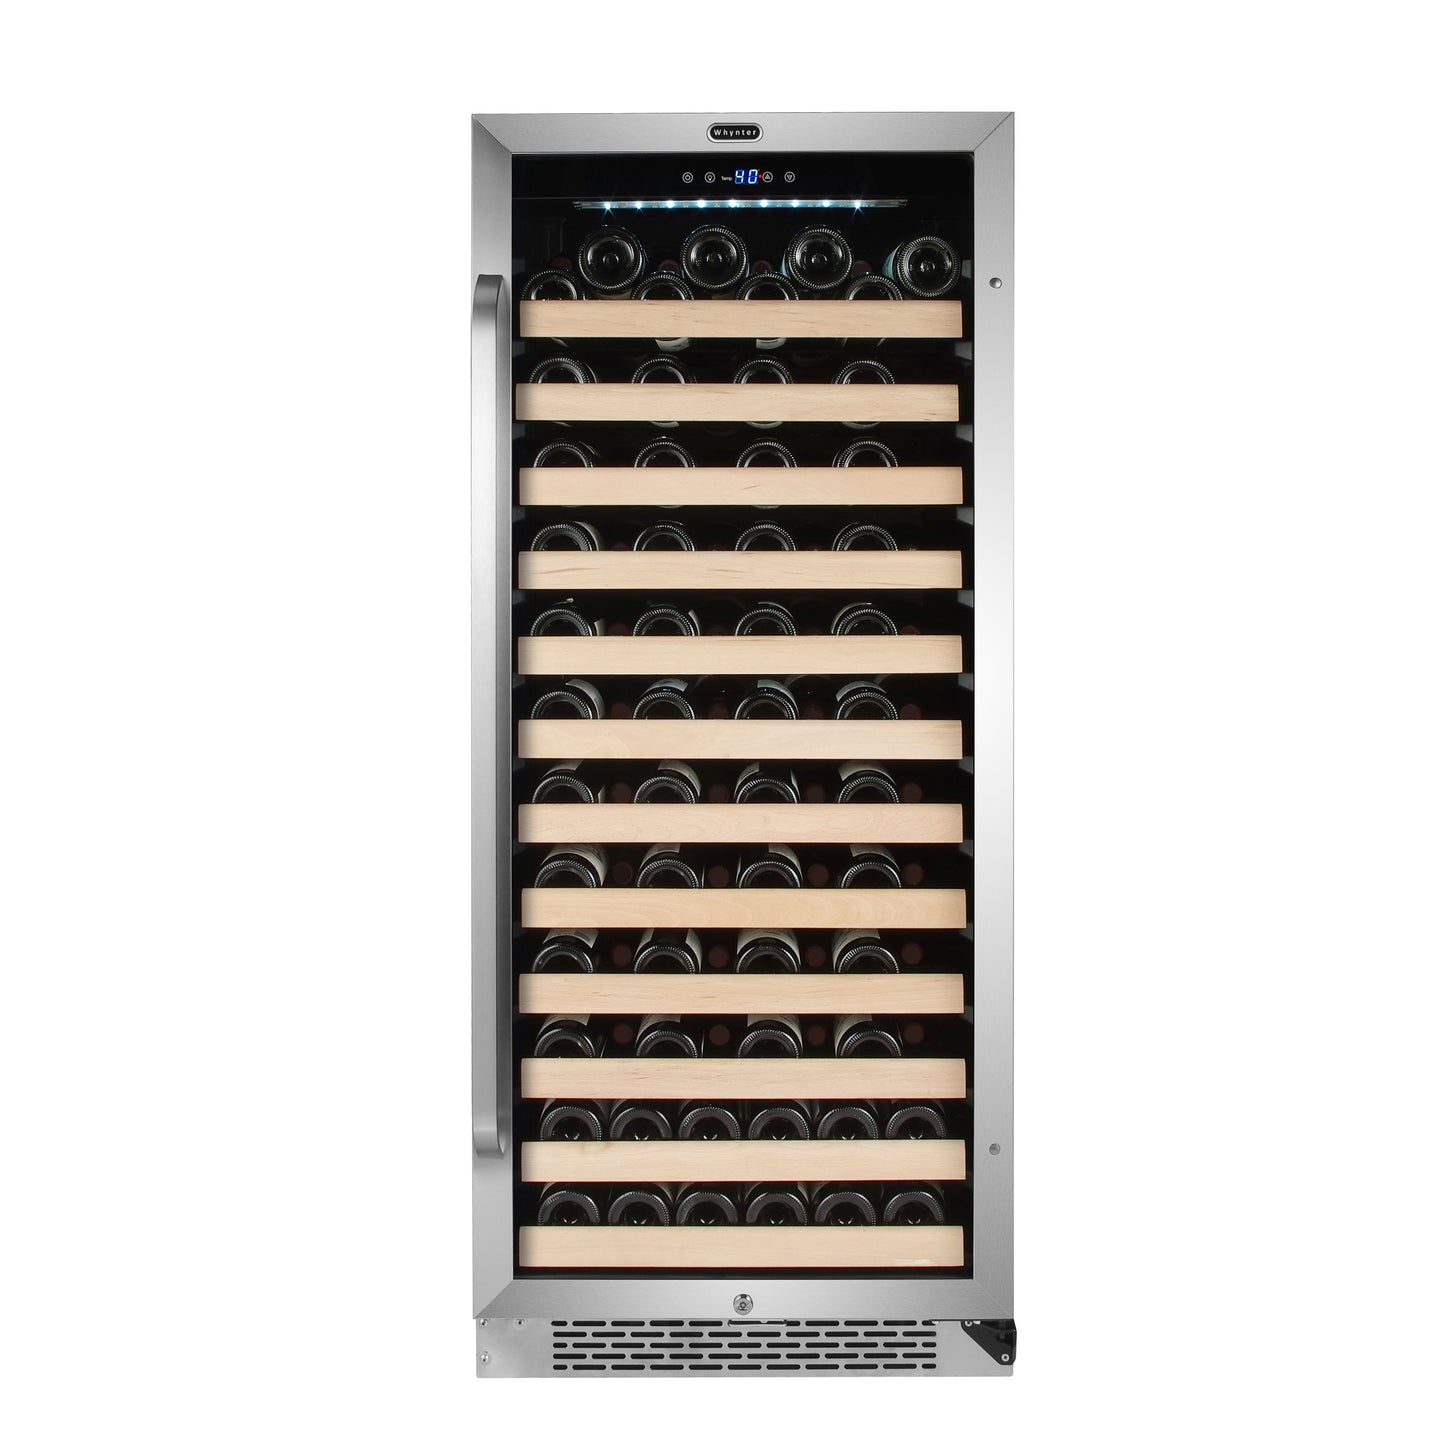 Buy a Whynter 100 Bottle Built-in Stainless Steel Compressor Wine Refrigerator by Chilled Beverage